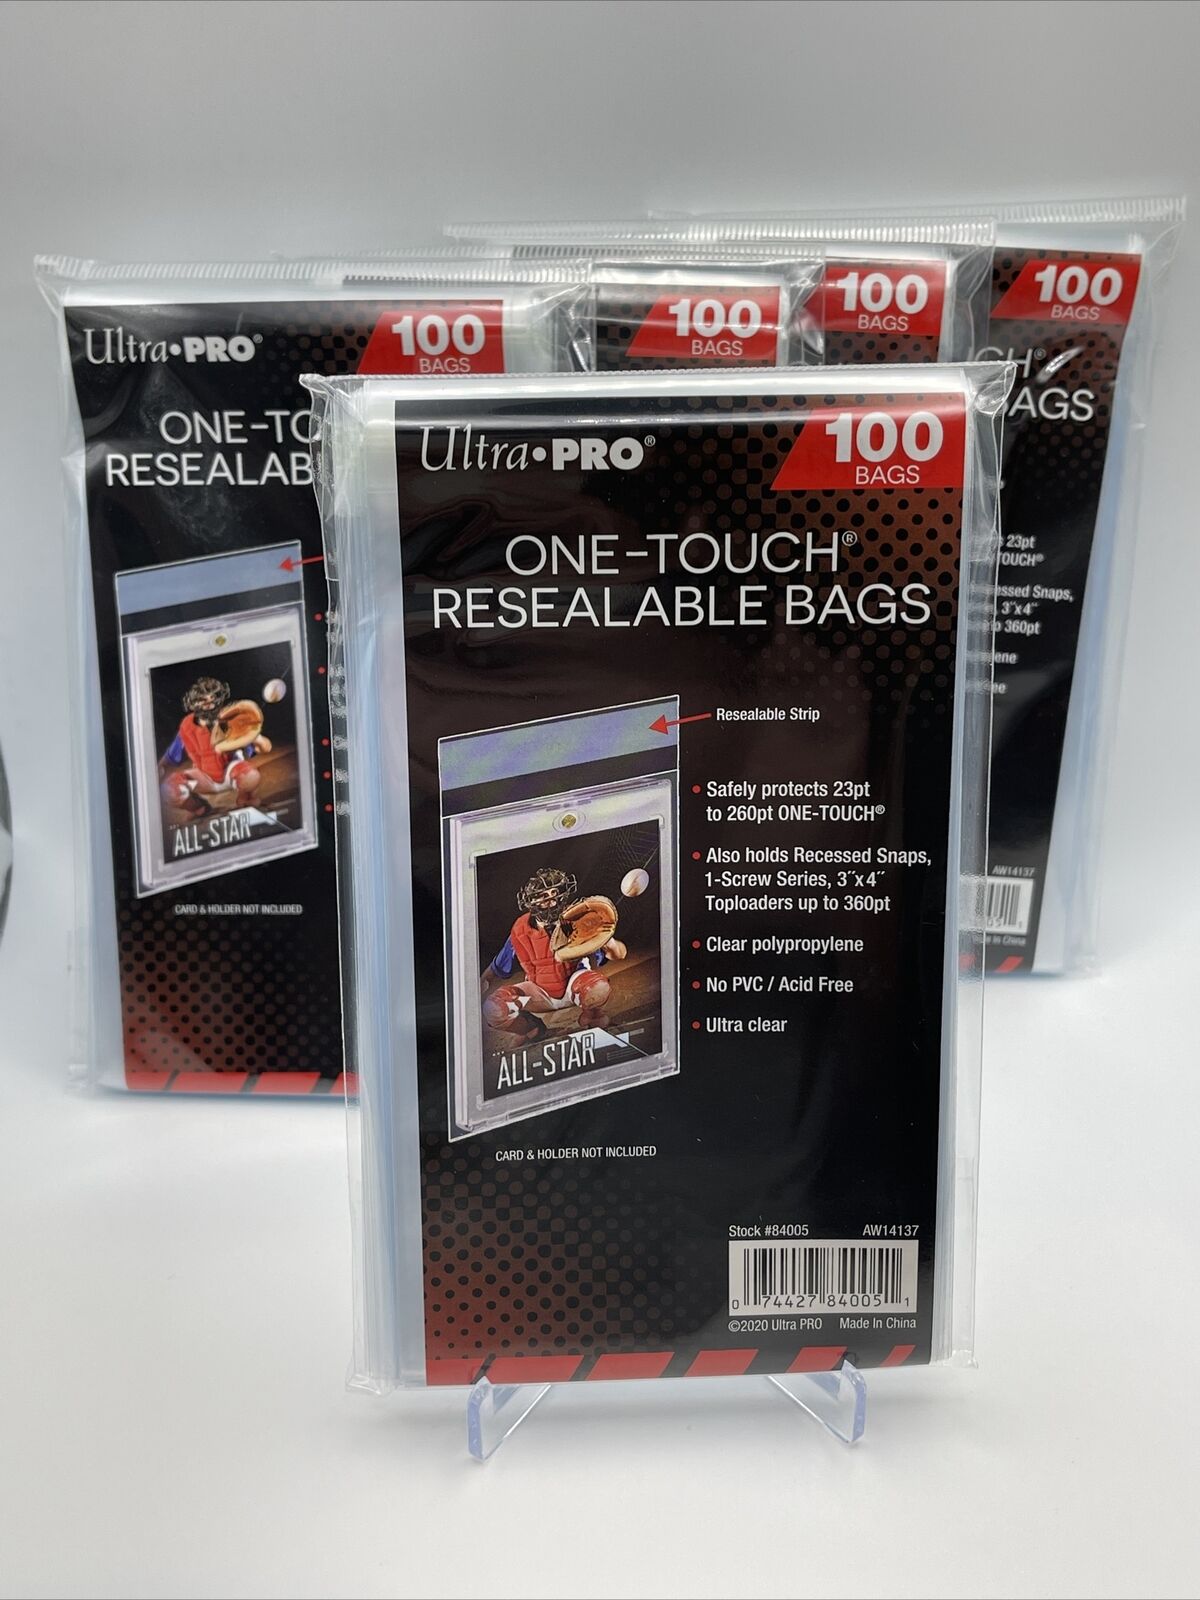 Ultra Pro One-Touch Resealable Bags 5 Packs of 100, 500 Total Bags